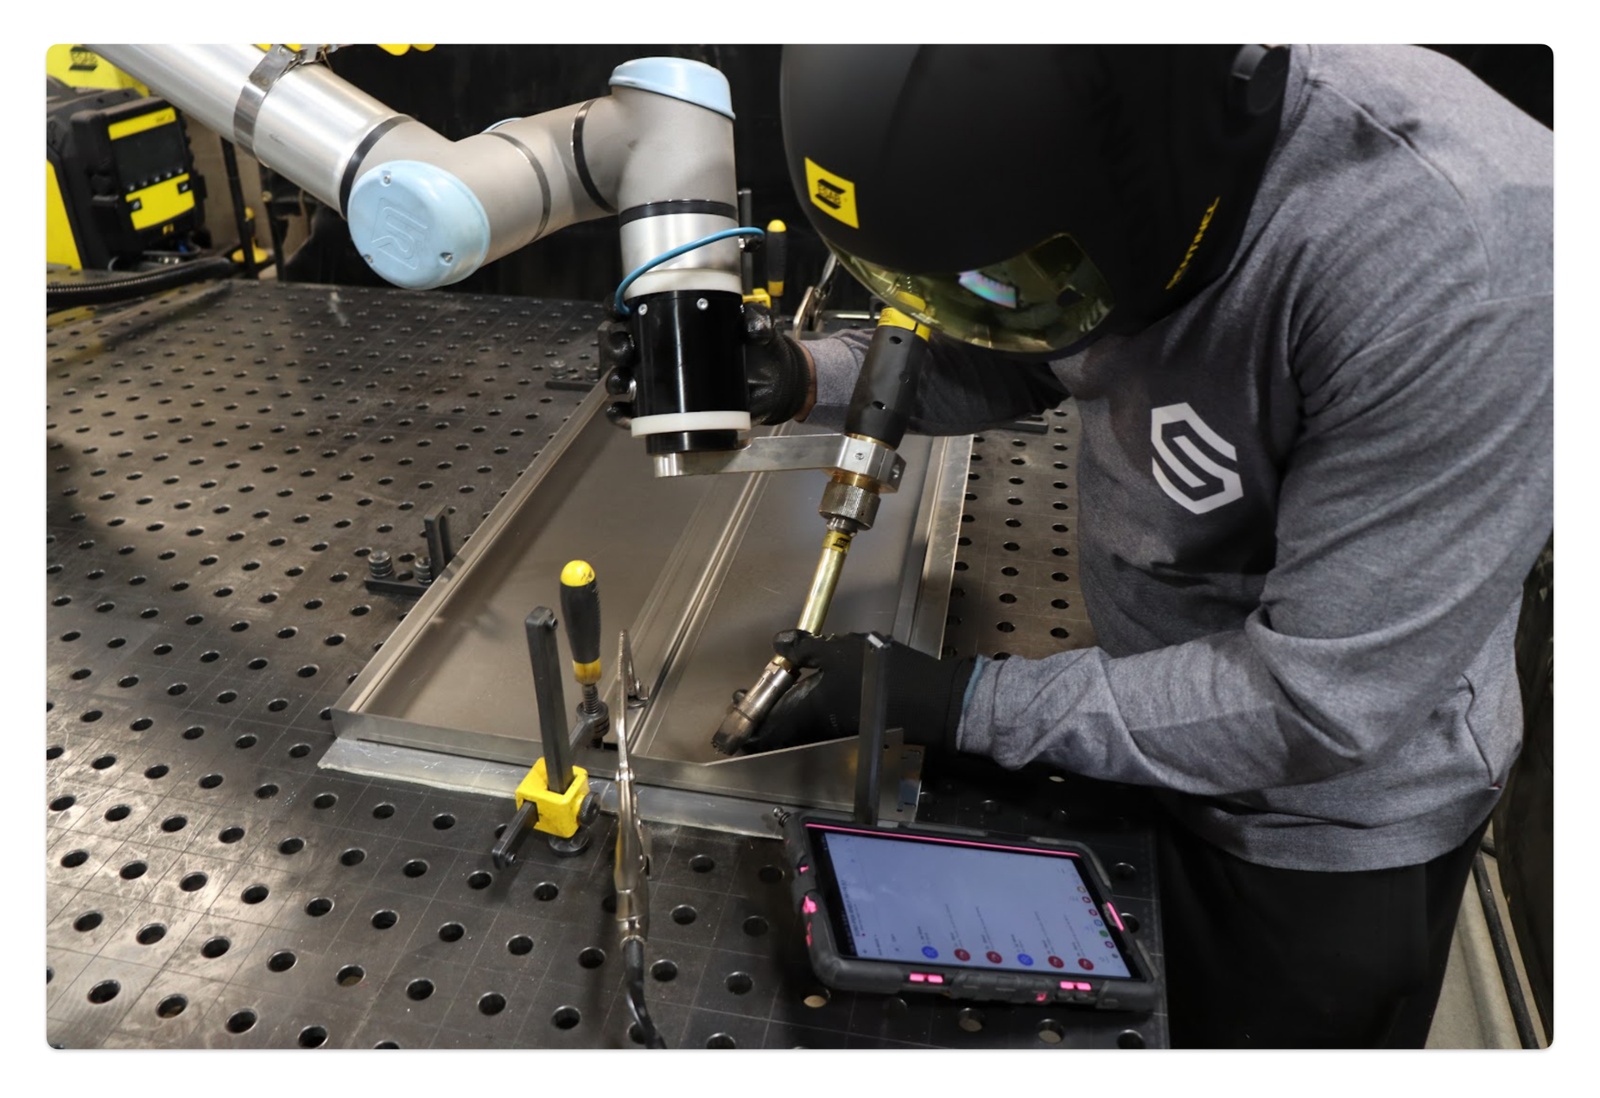 Welding Cobot Safety: How to Prepare Your Workspace to Safely Include Cobots